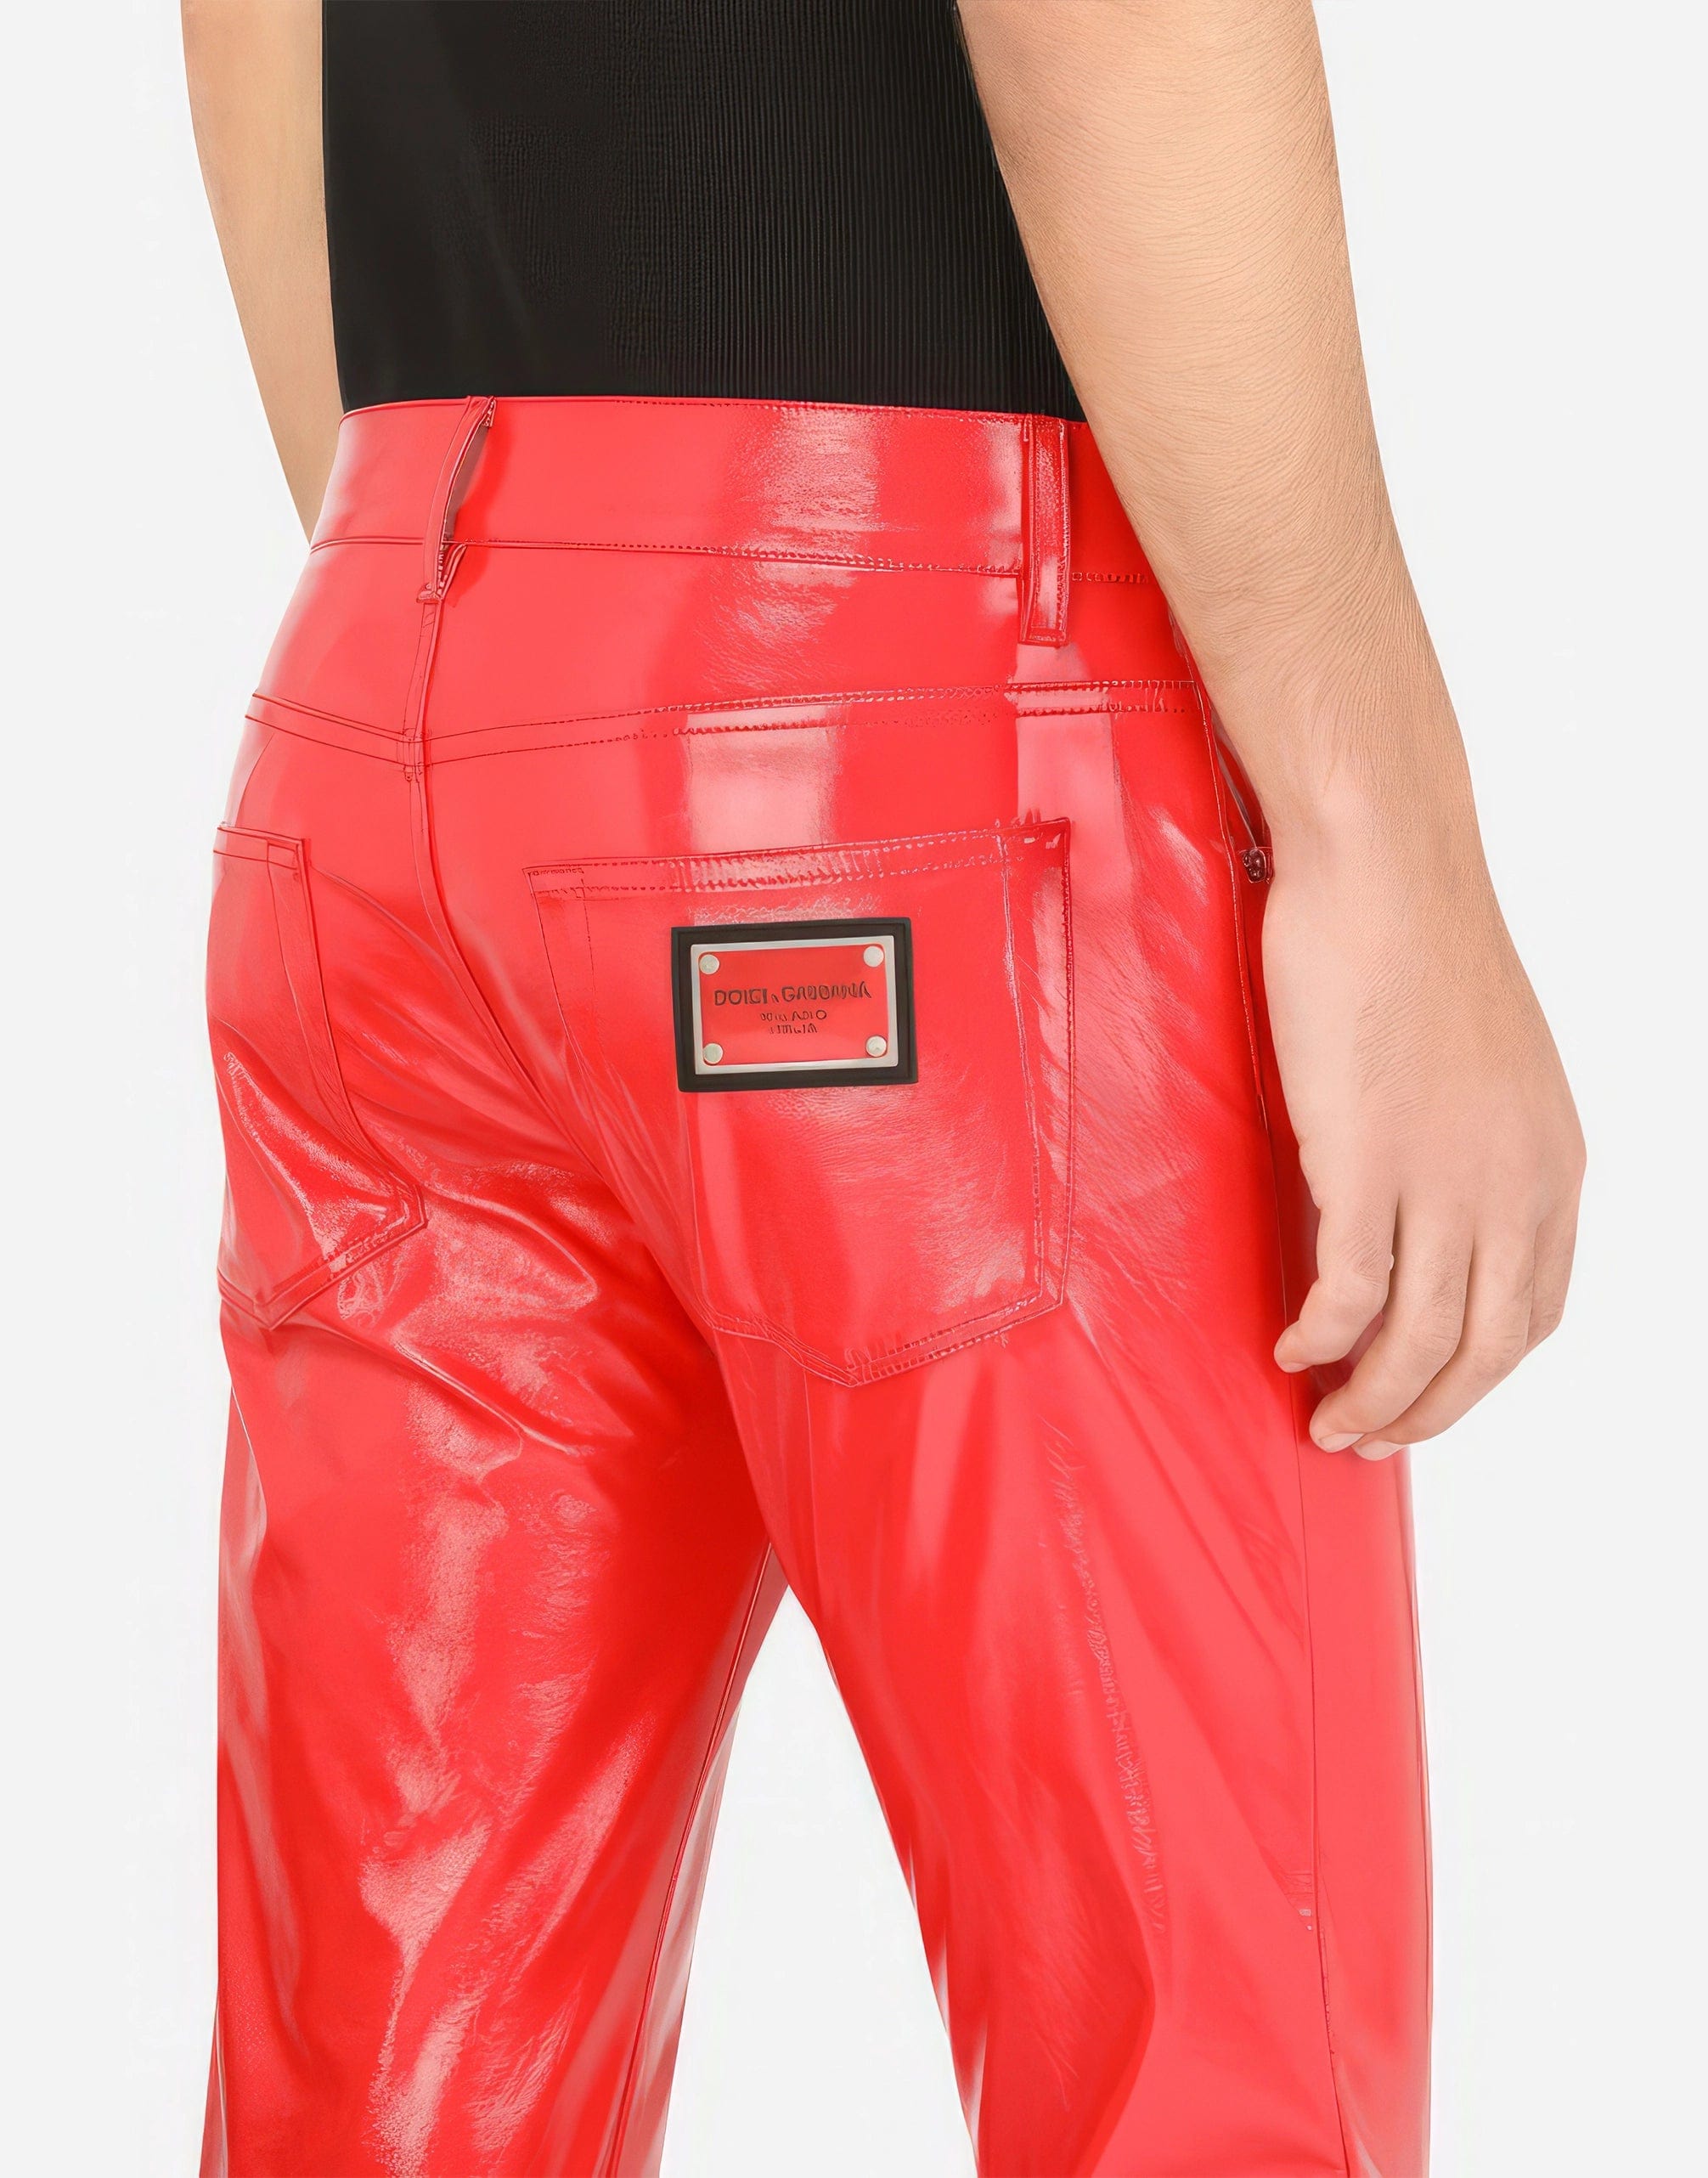 Coated Polyester Skinny Pants